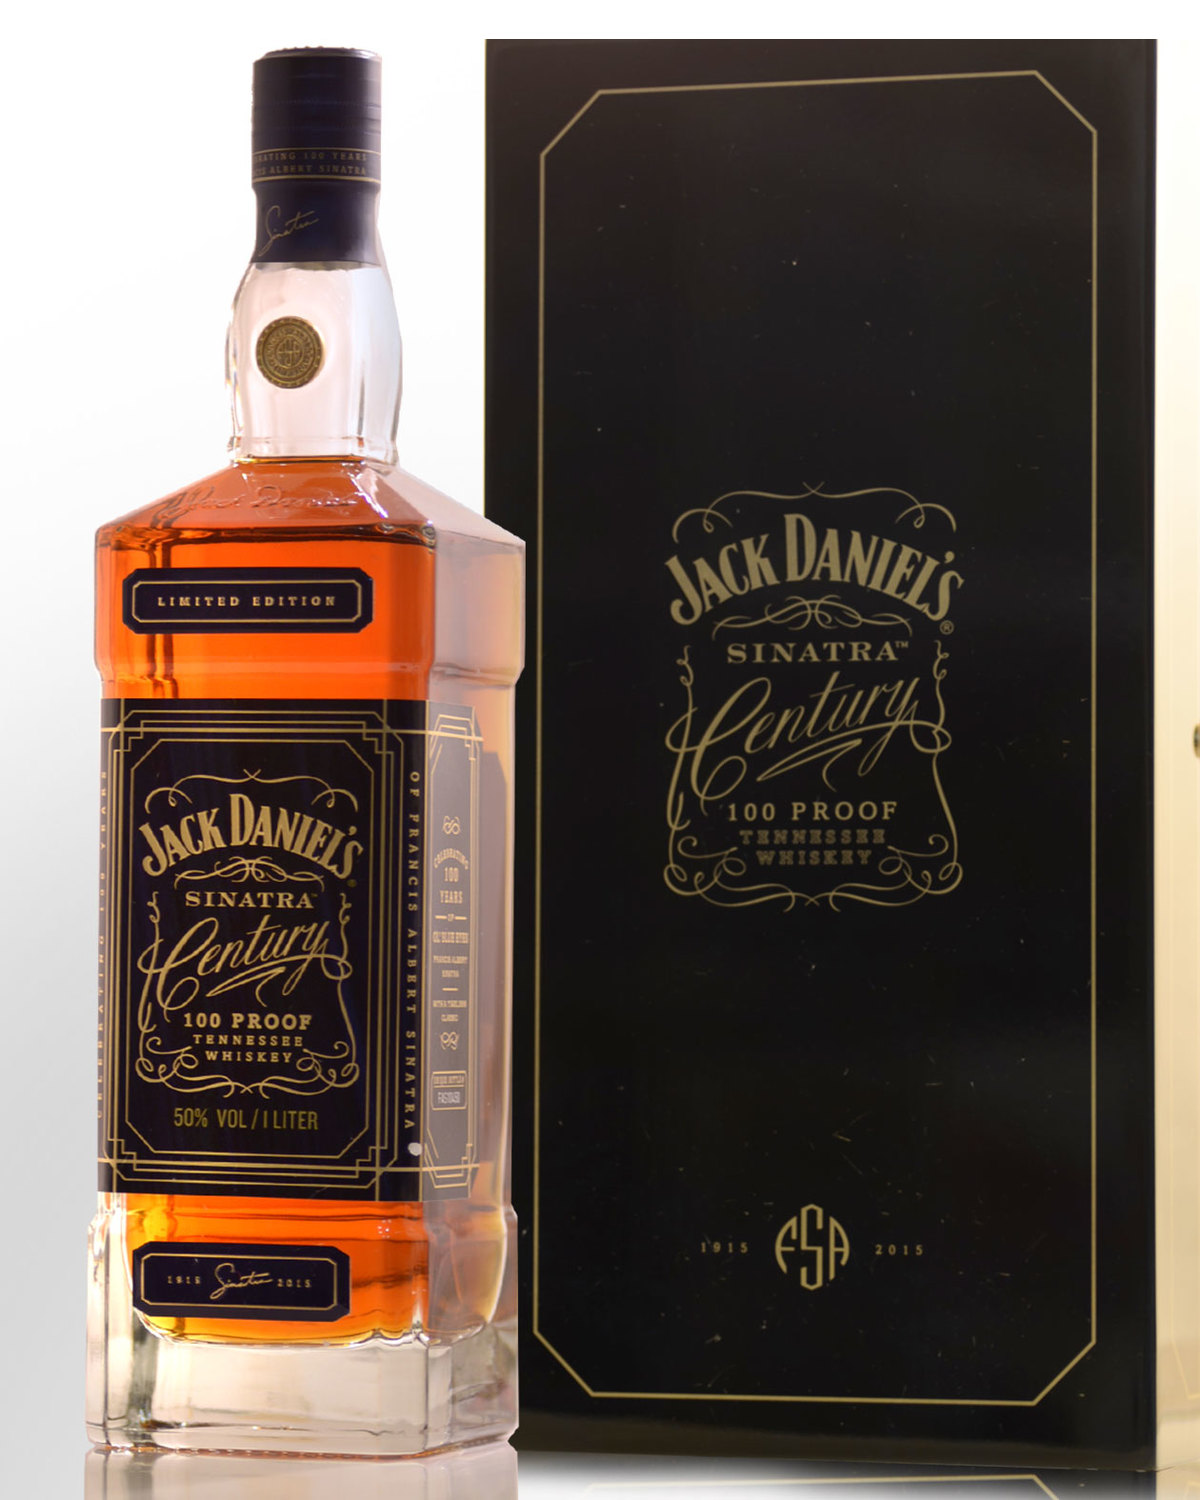 Obtaining The Jack Daniels Sinatra Century 100 Proof Tennessee Whisky Online In Winnipeg Manitoba Canada